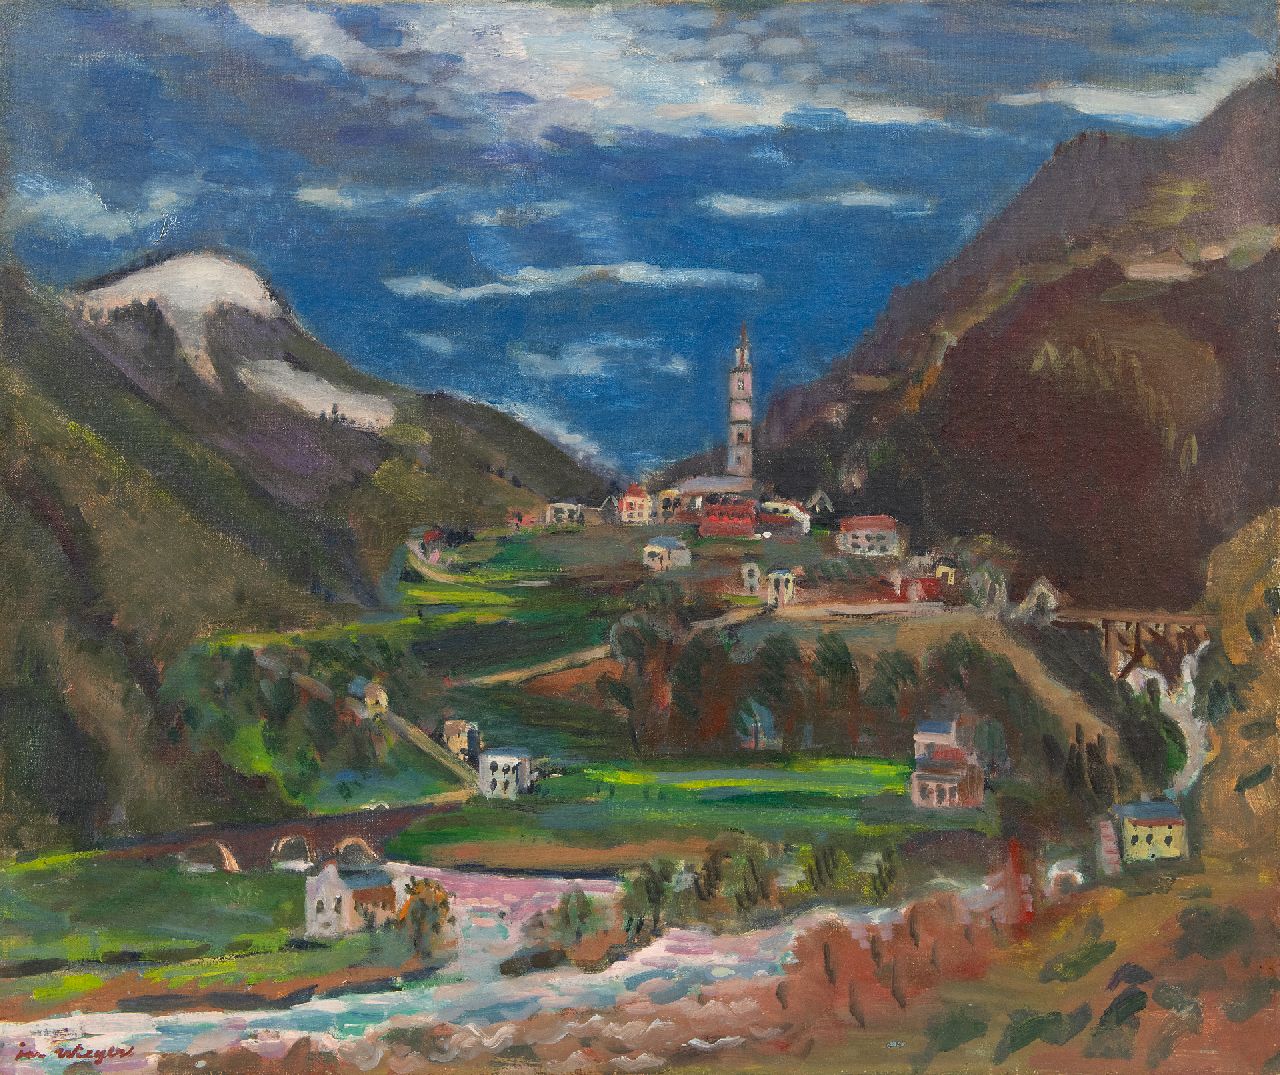 Wiegers J.  | Jan Wiegers | Paintings offered for sale | A view of  Intragna, Ticino, Switzerland, oil on canvas 61.5 x 73.4 cm, signed l.l. and painted ca. 1947